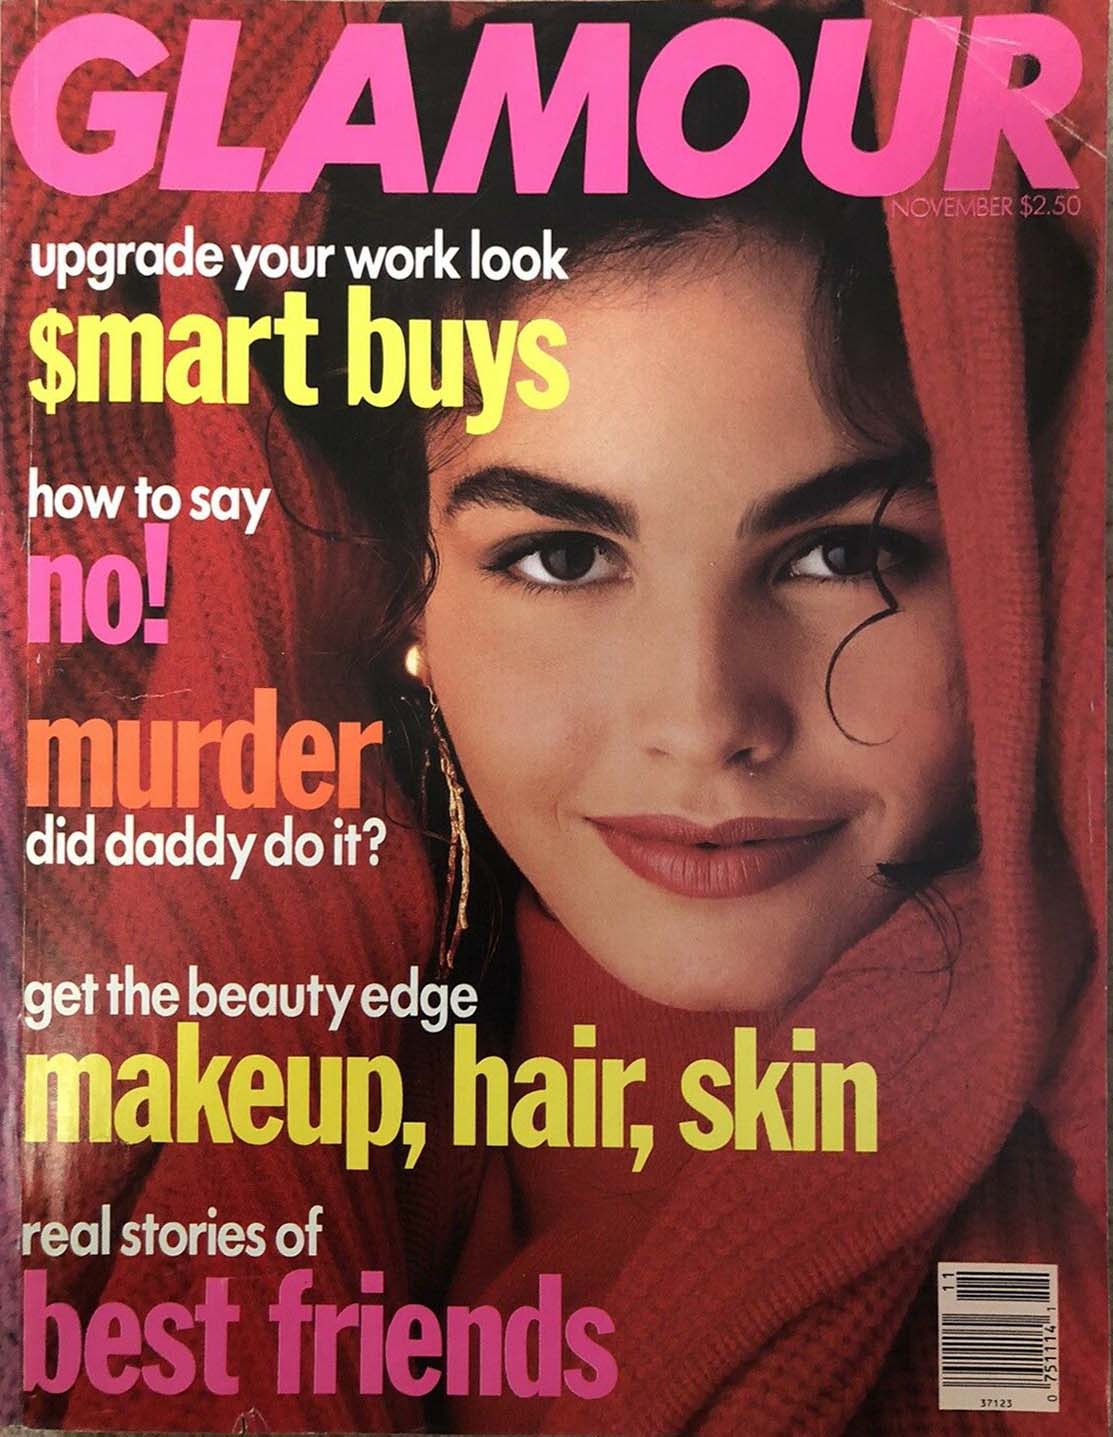 Glamour November 1990 magazine back issue Glamour magizine back copy Glamour November 1990 Womens Magazine Back Issue Published by Conde Nast Publications. Upgrade Your Work Look $mart Buys.